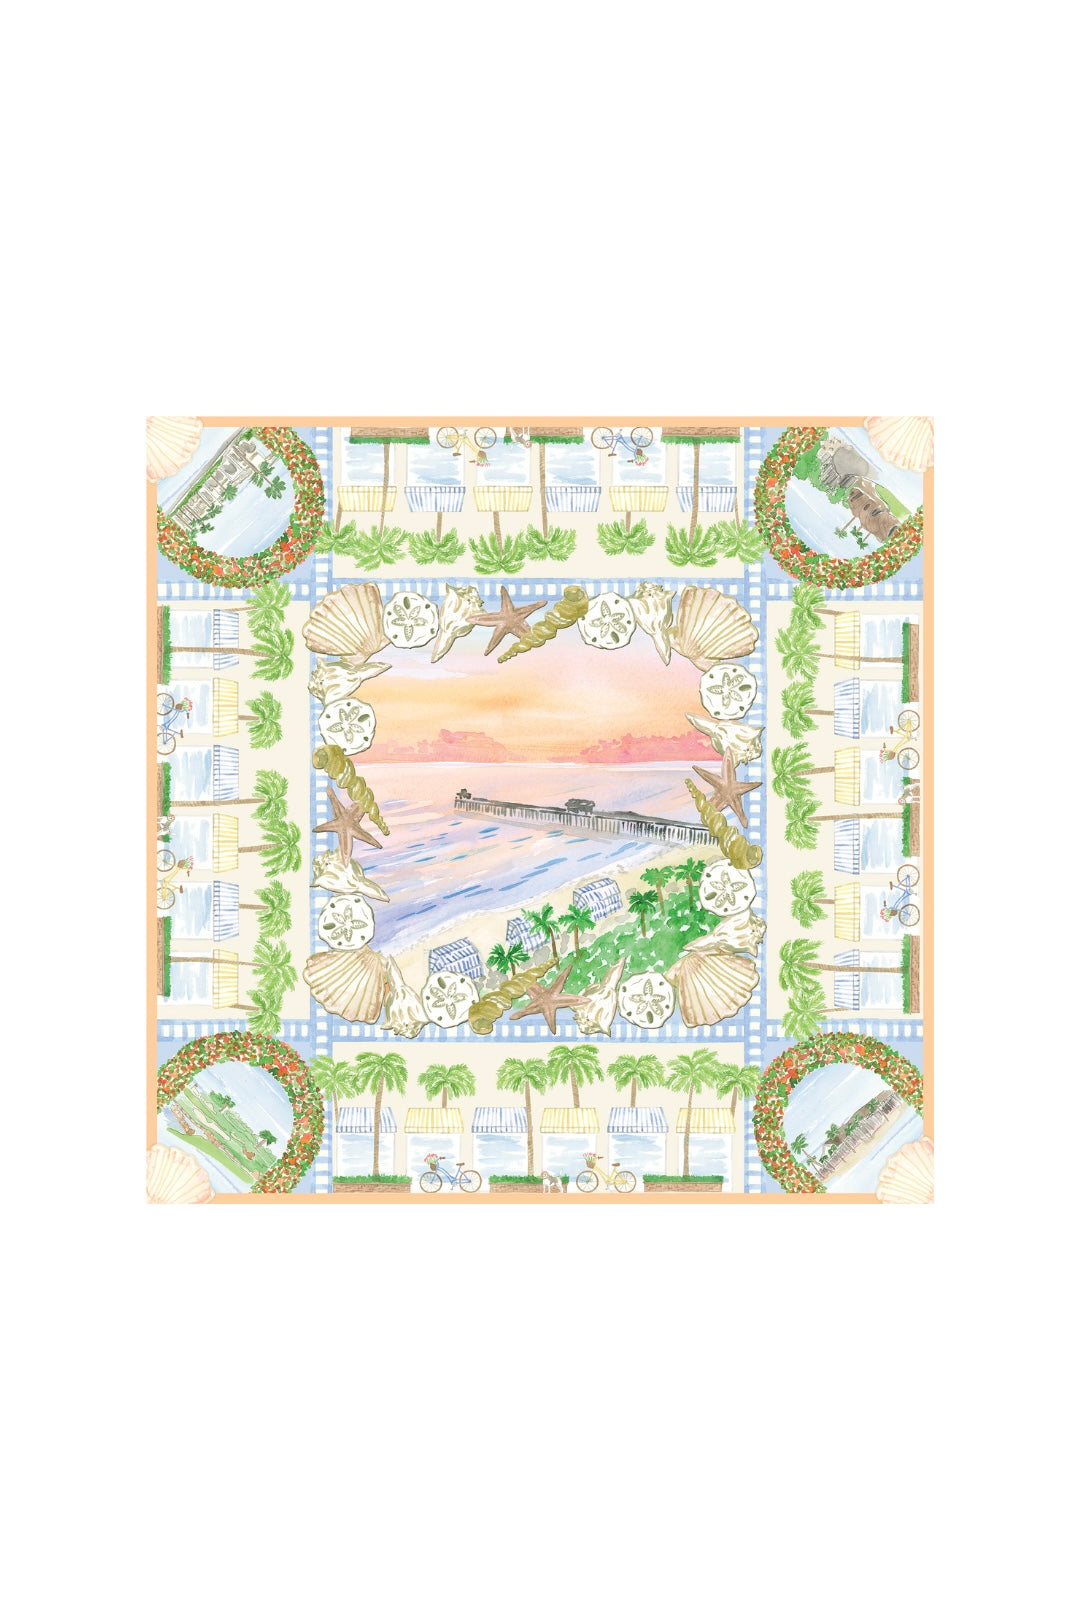 Naples Exclusive Watercolor Silk Scarf from Southern Sunday